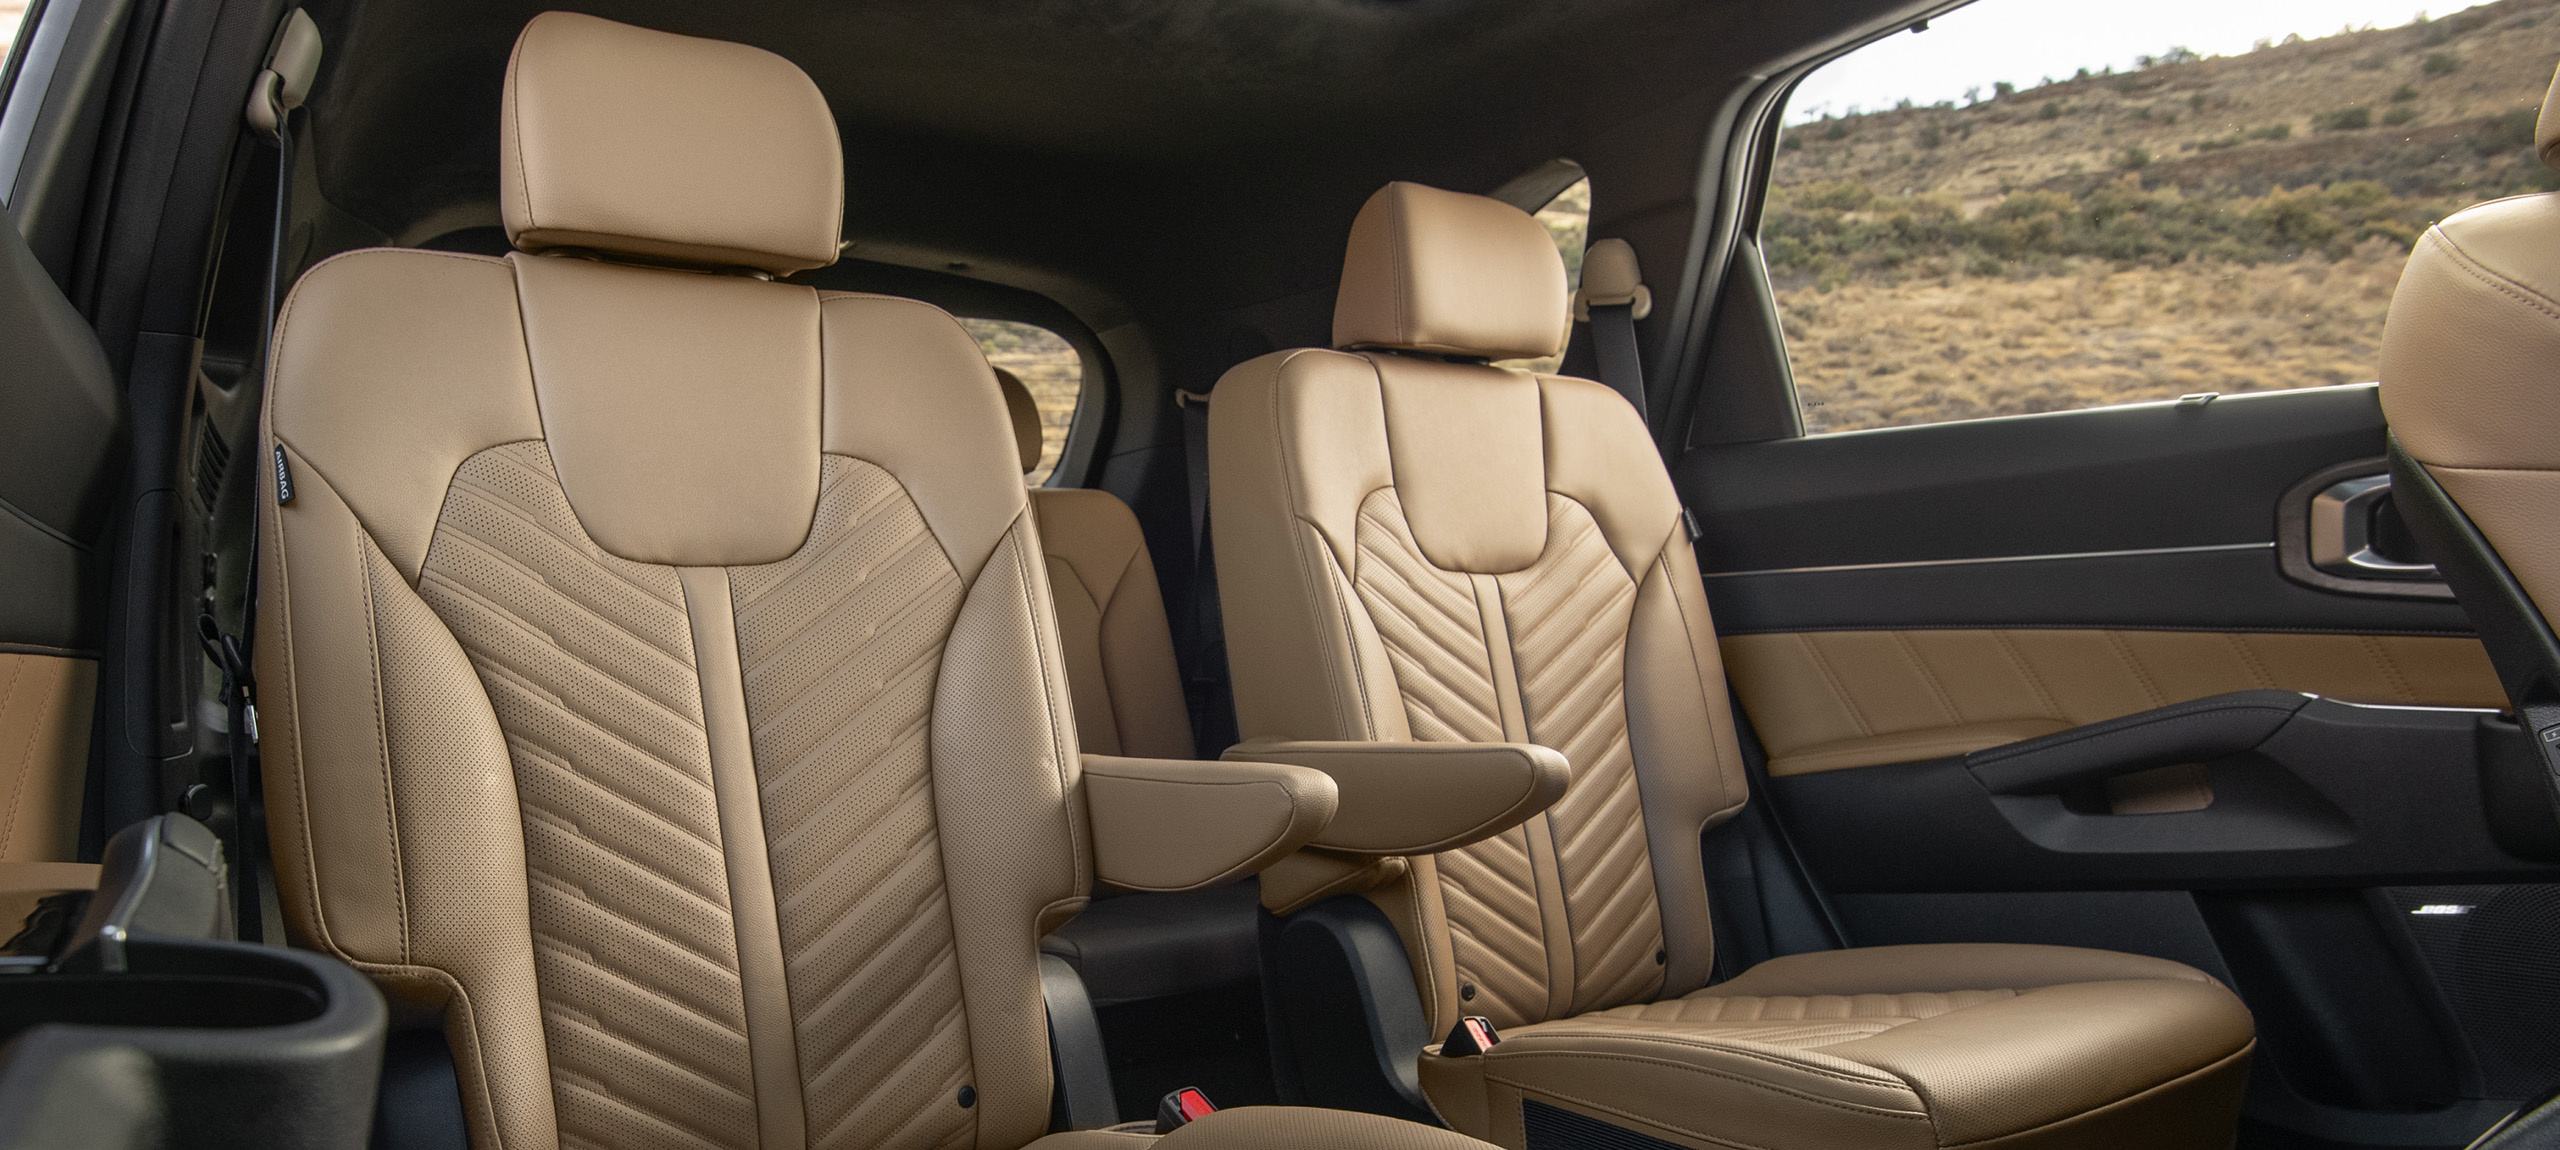 2024 Kia Sorento interior, three-quarter front view of the second row captain chair seats in brown leather